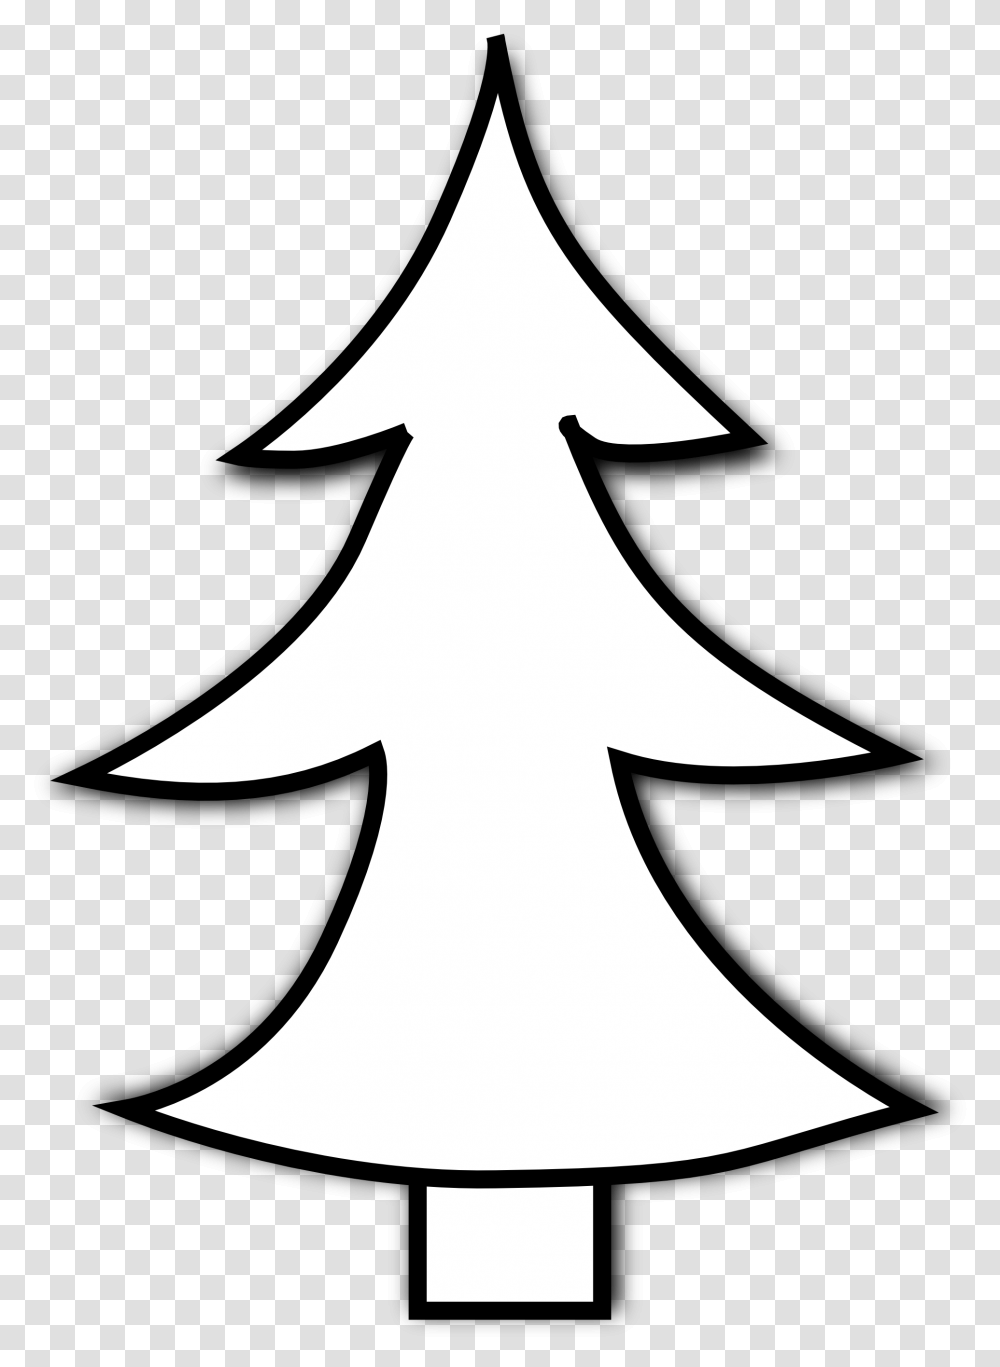 Best Christmas Tree Clipart Black And White Christmas Free Clip Art Black And White, Stencil, Star Symbol Transparent Png